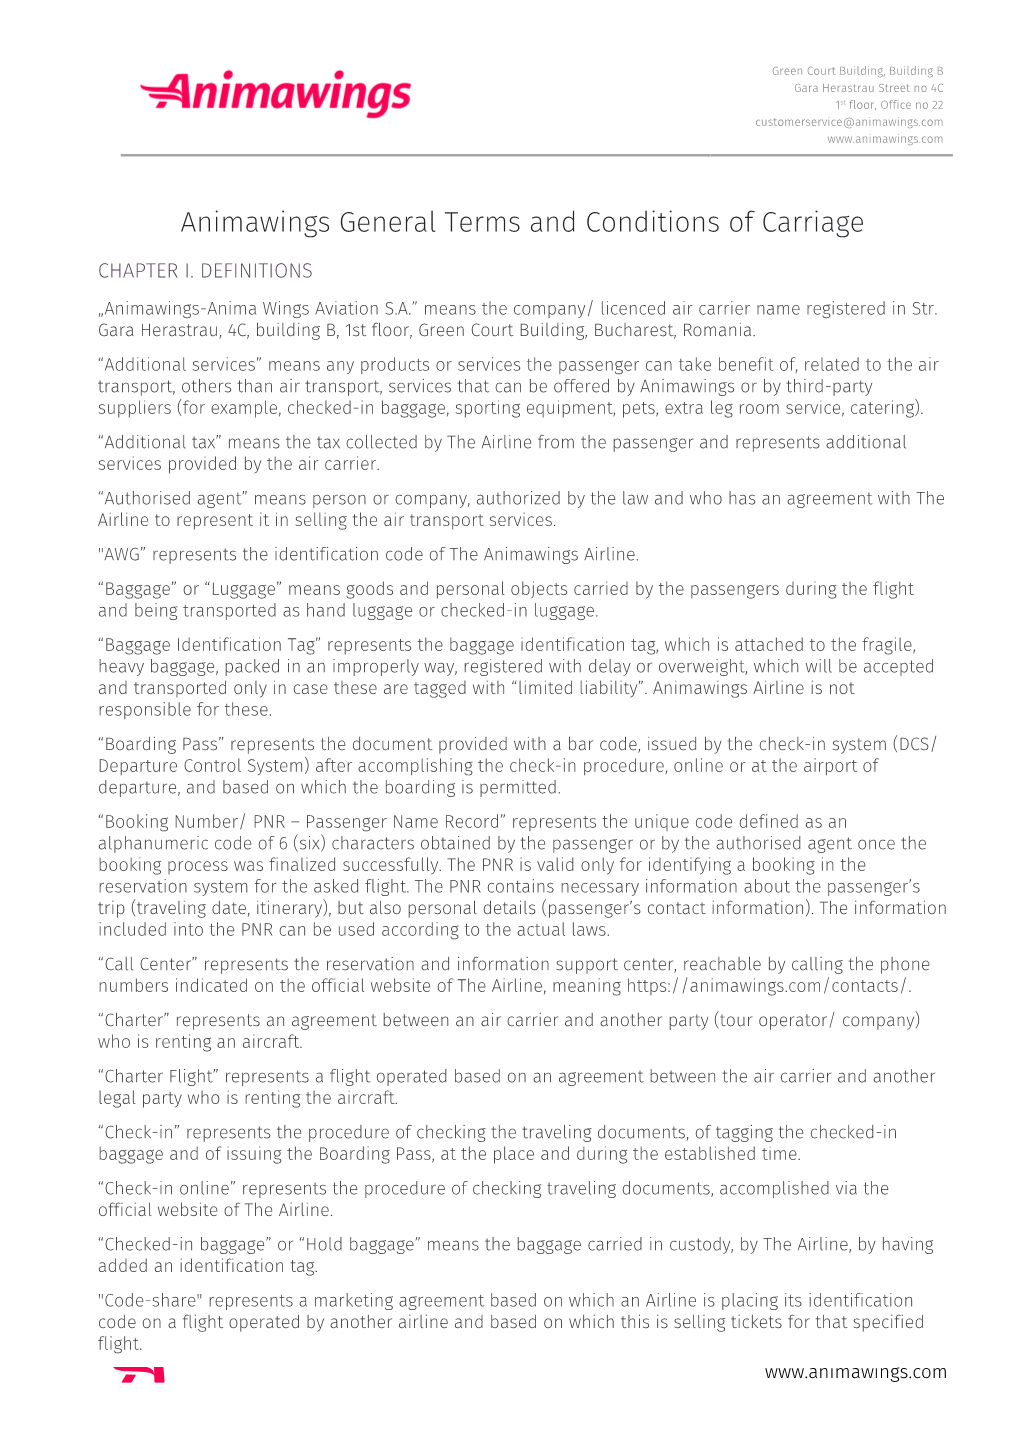 Animawings General Terms and Conditions of Carriage